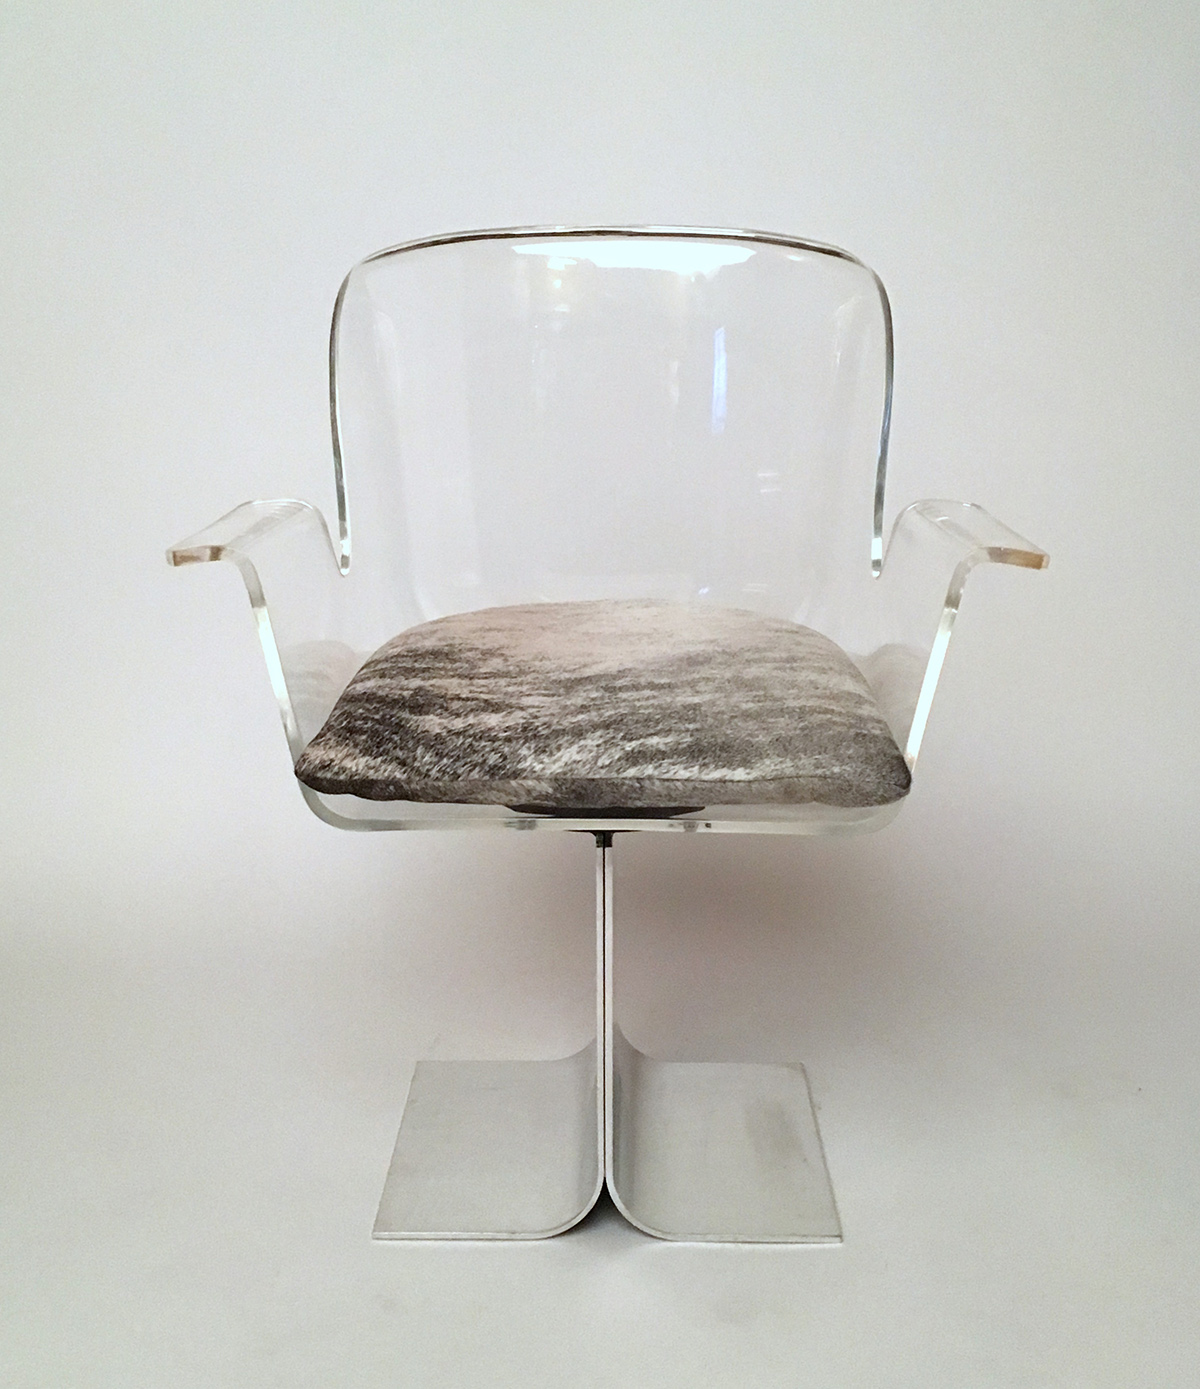 The Pace Lucite Chair. / Photo courtesy of Colleen Mothander